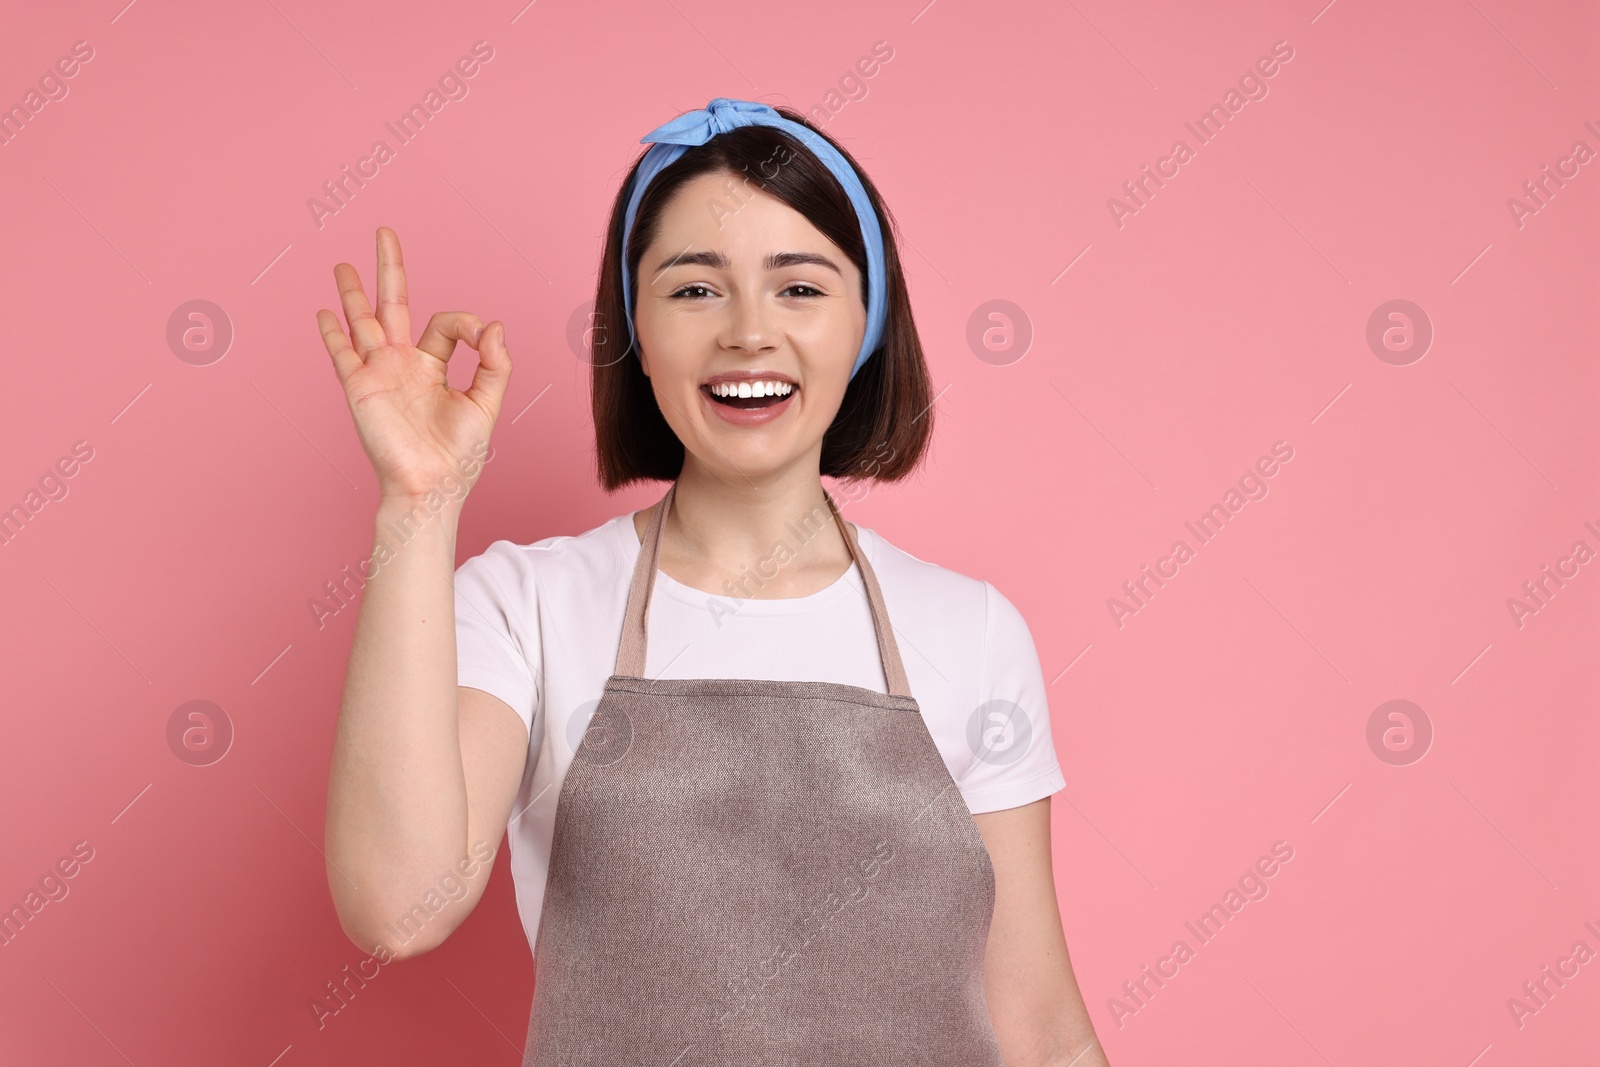 Photo of Happy confectioner showing ok gesture on pink background